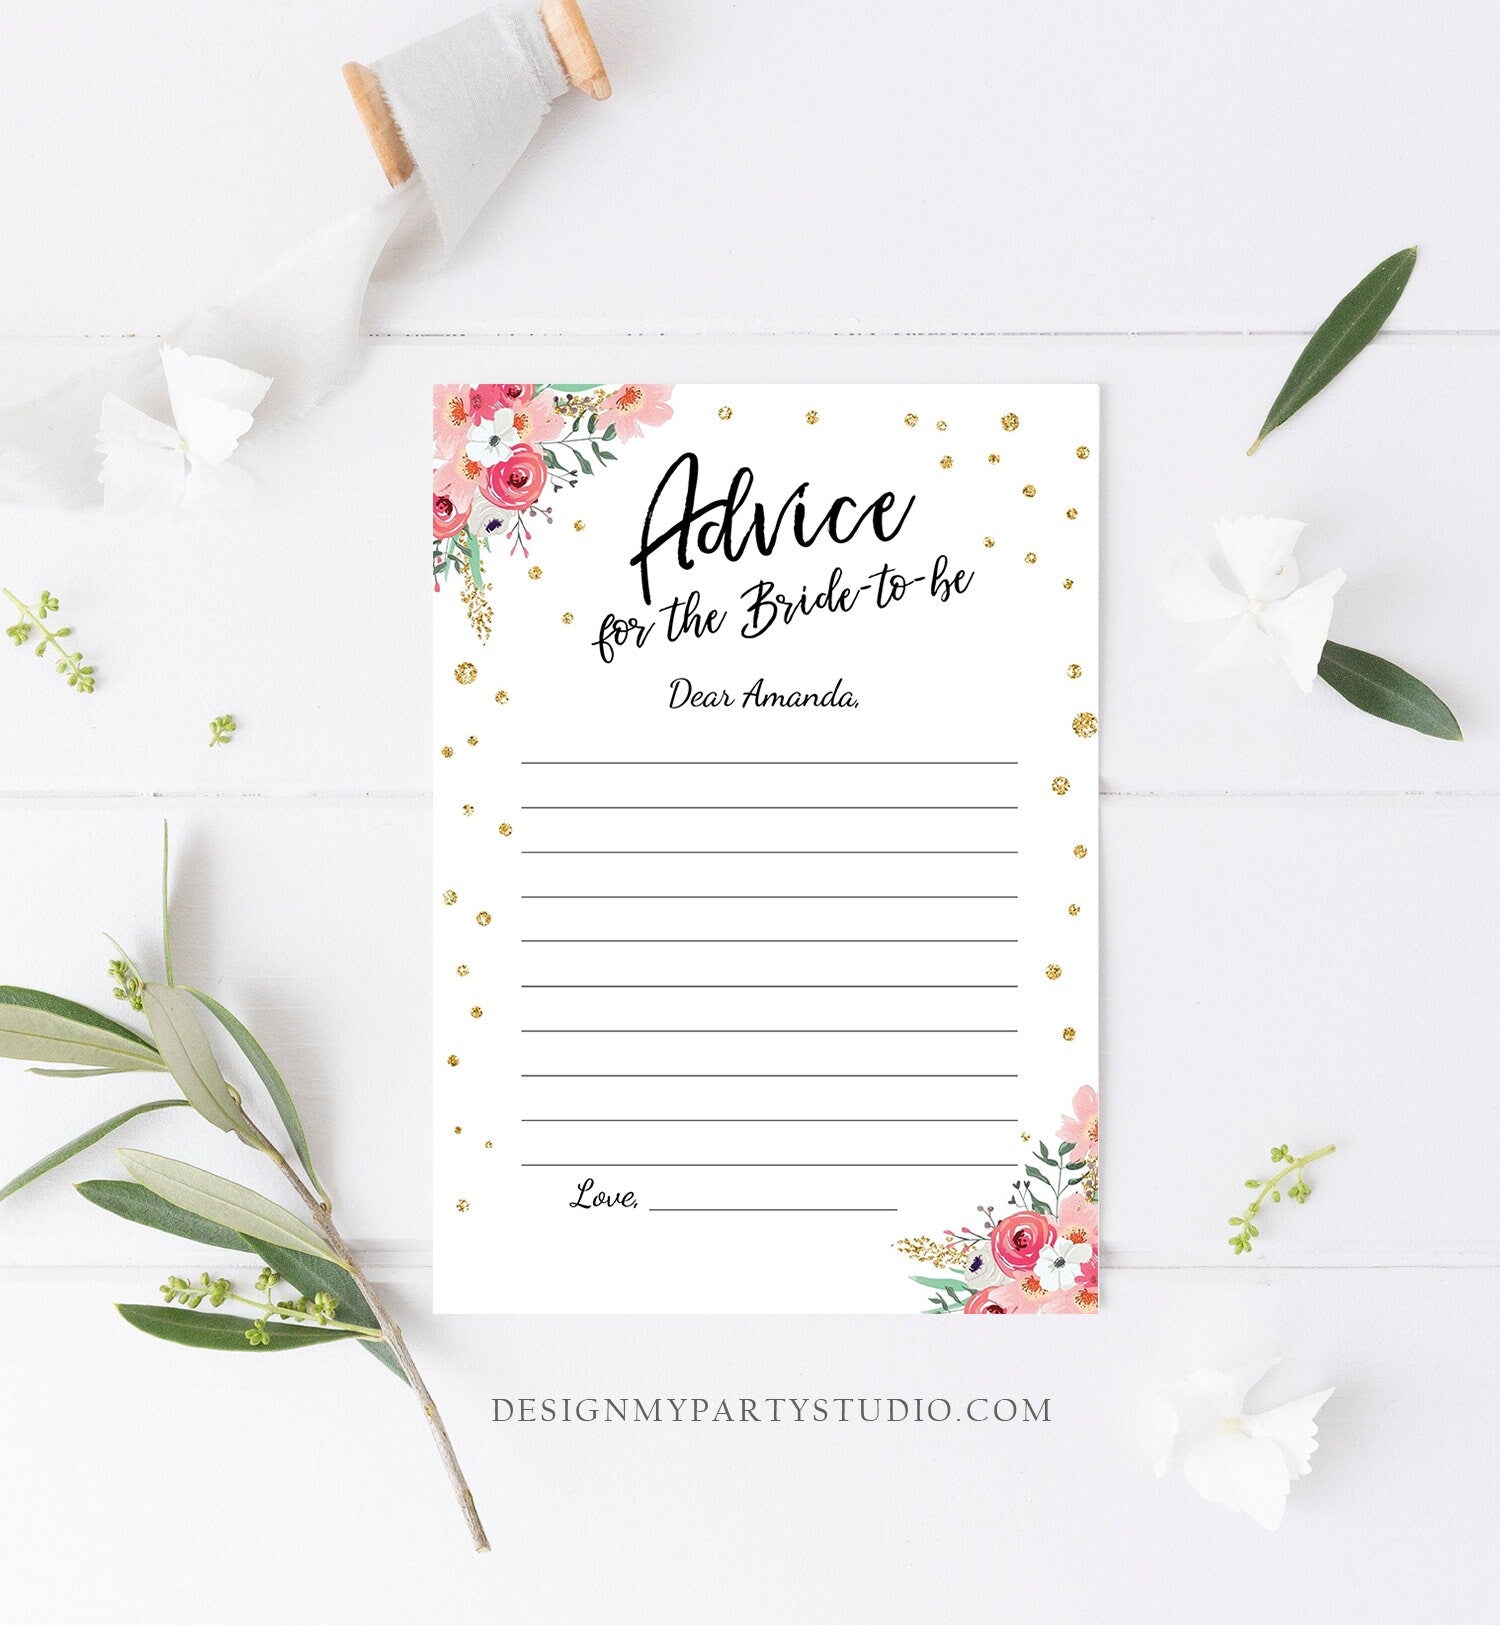 Editable Advice for the Bride-to-Be Card Words of Wisdom Advice for Bride Floral Pink Gold Game Activity Corjl Template Printable 0030 0318